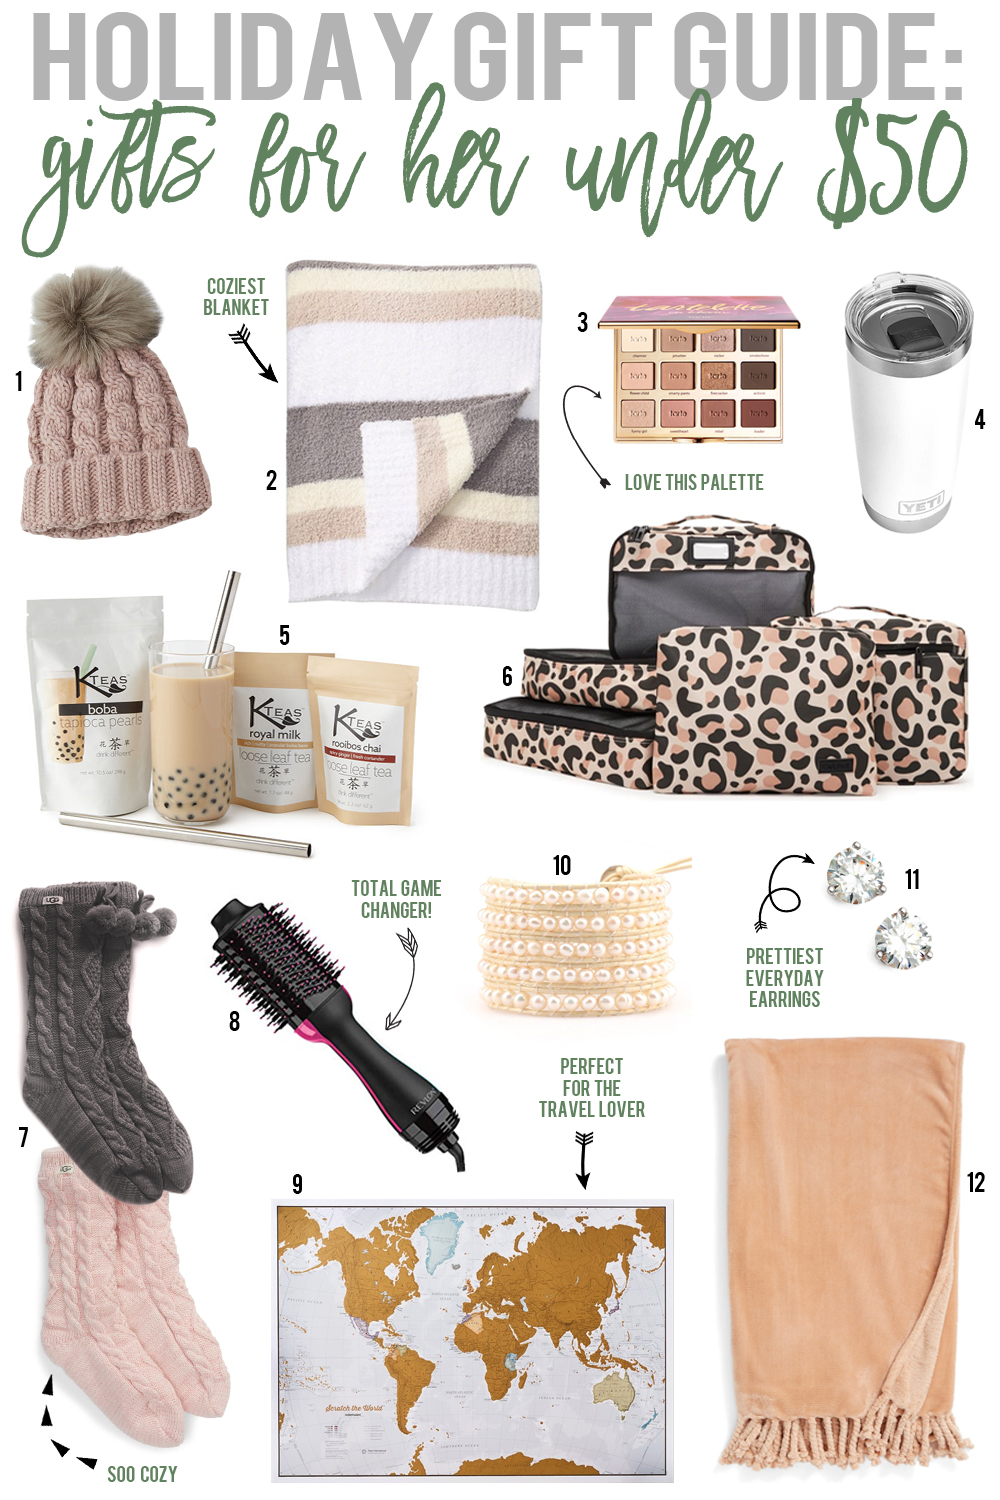 50 Perfect Gifts Under $50  Ultimate Online Holiday Shopping Guide